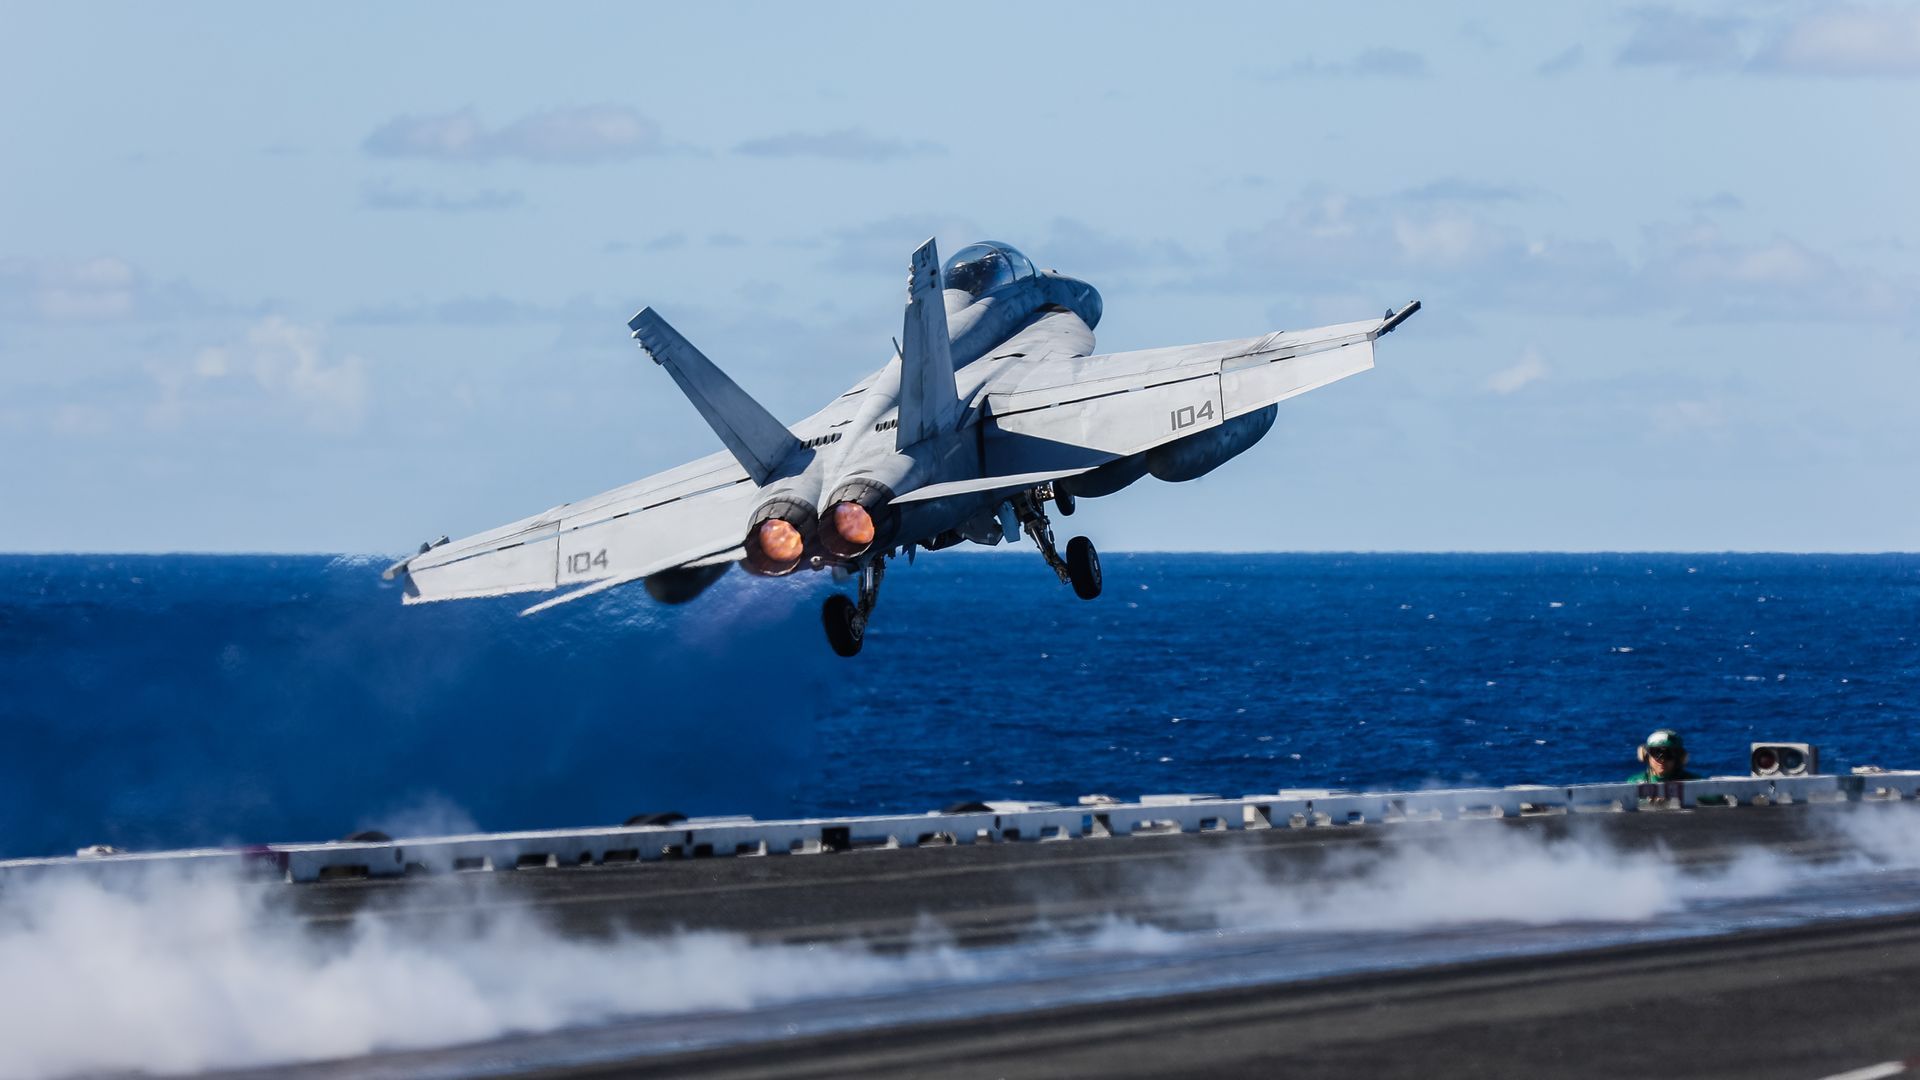 Image of the F18 taking off from Aircraft Carrier